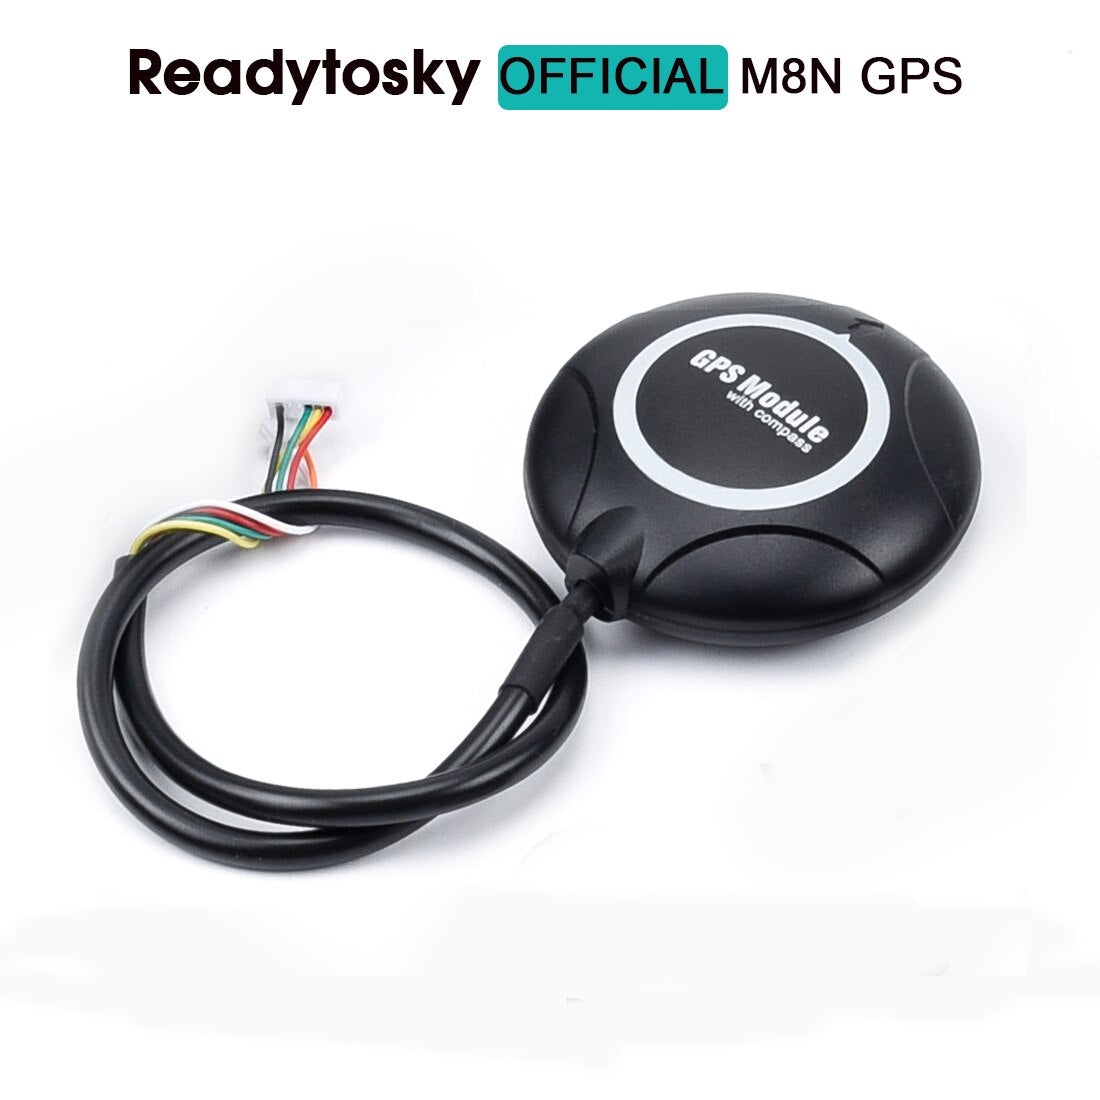 Readytosky OFFICIAL MBN GPS GPS L Module Tcompus